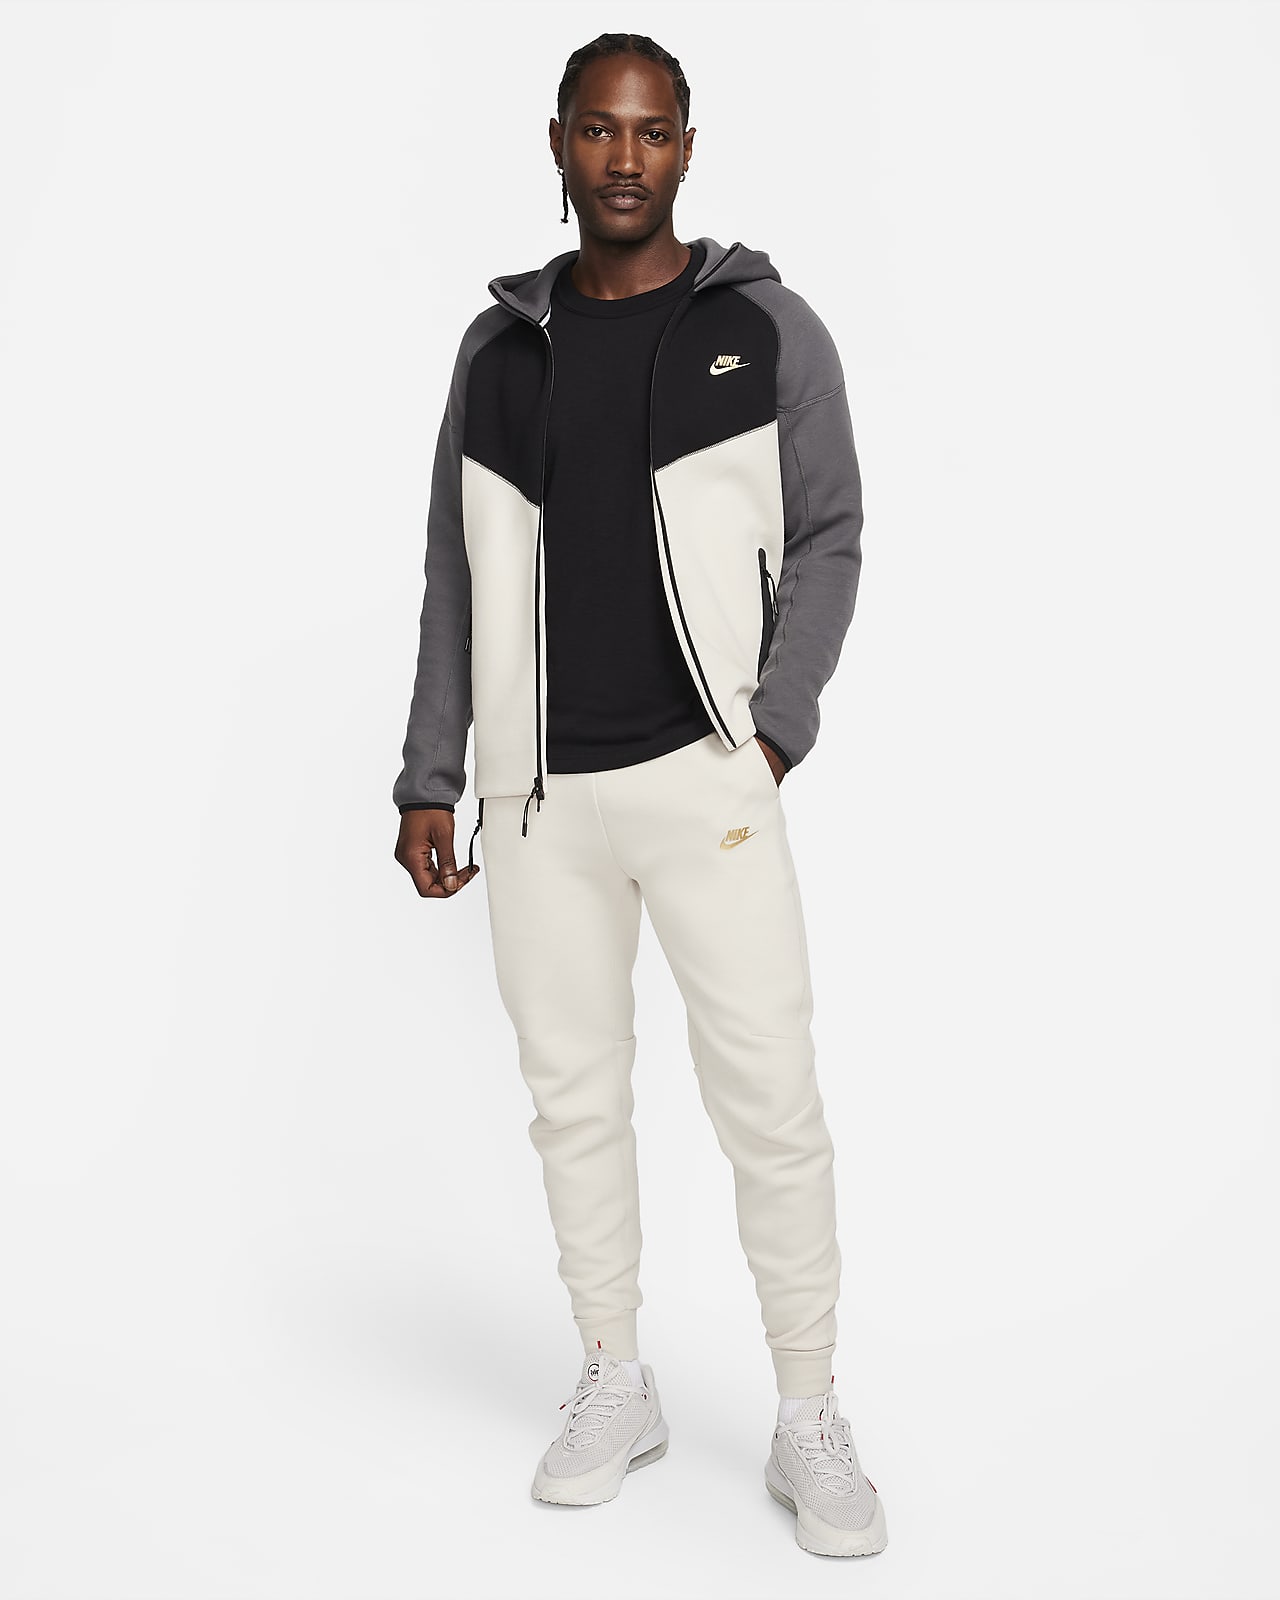 Stay stylish and comfortable with NIKE Sportswear Tech Fleece Jogger Pants